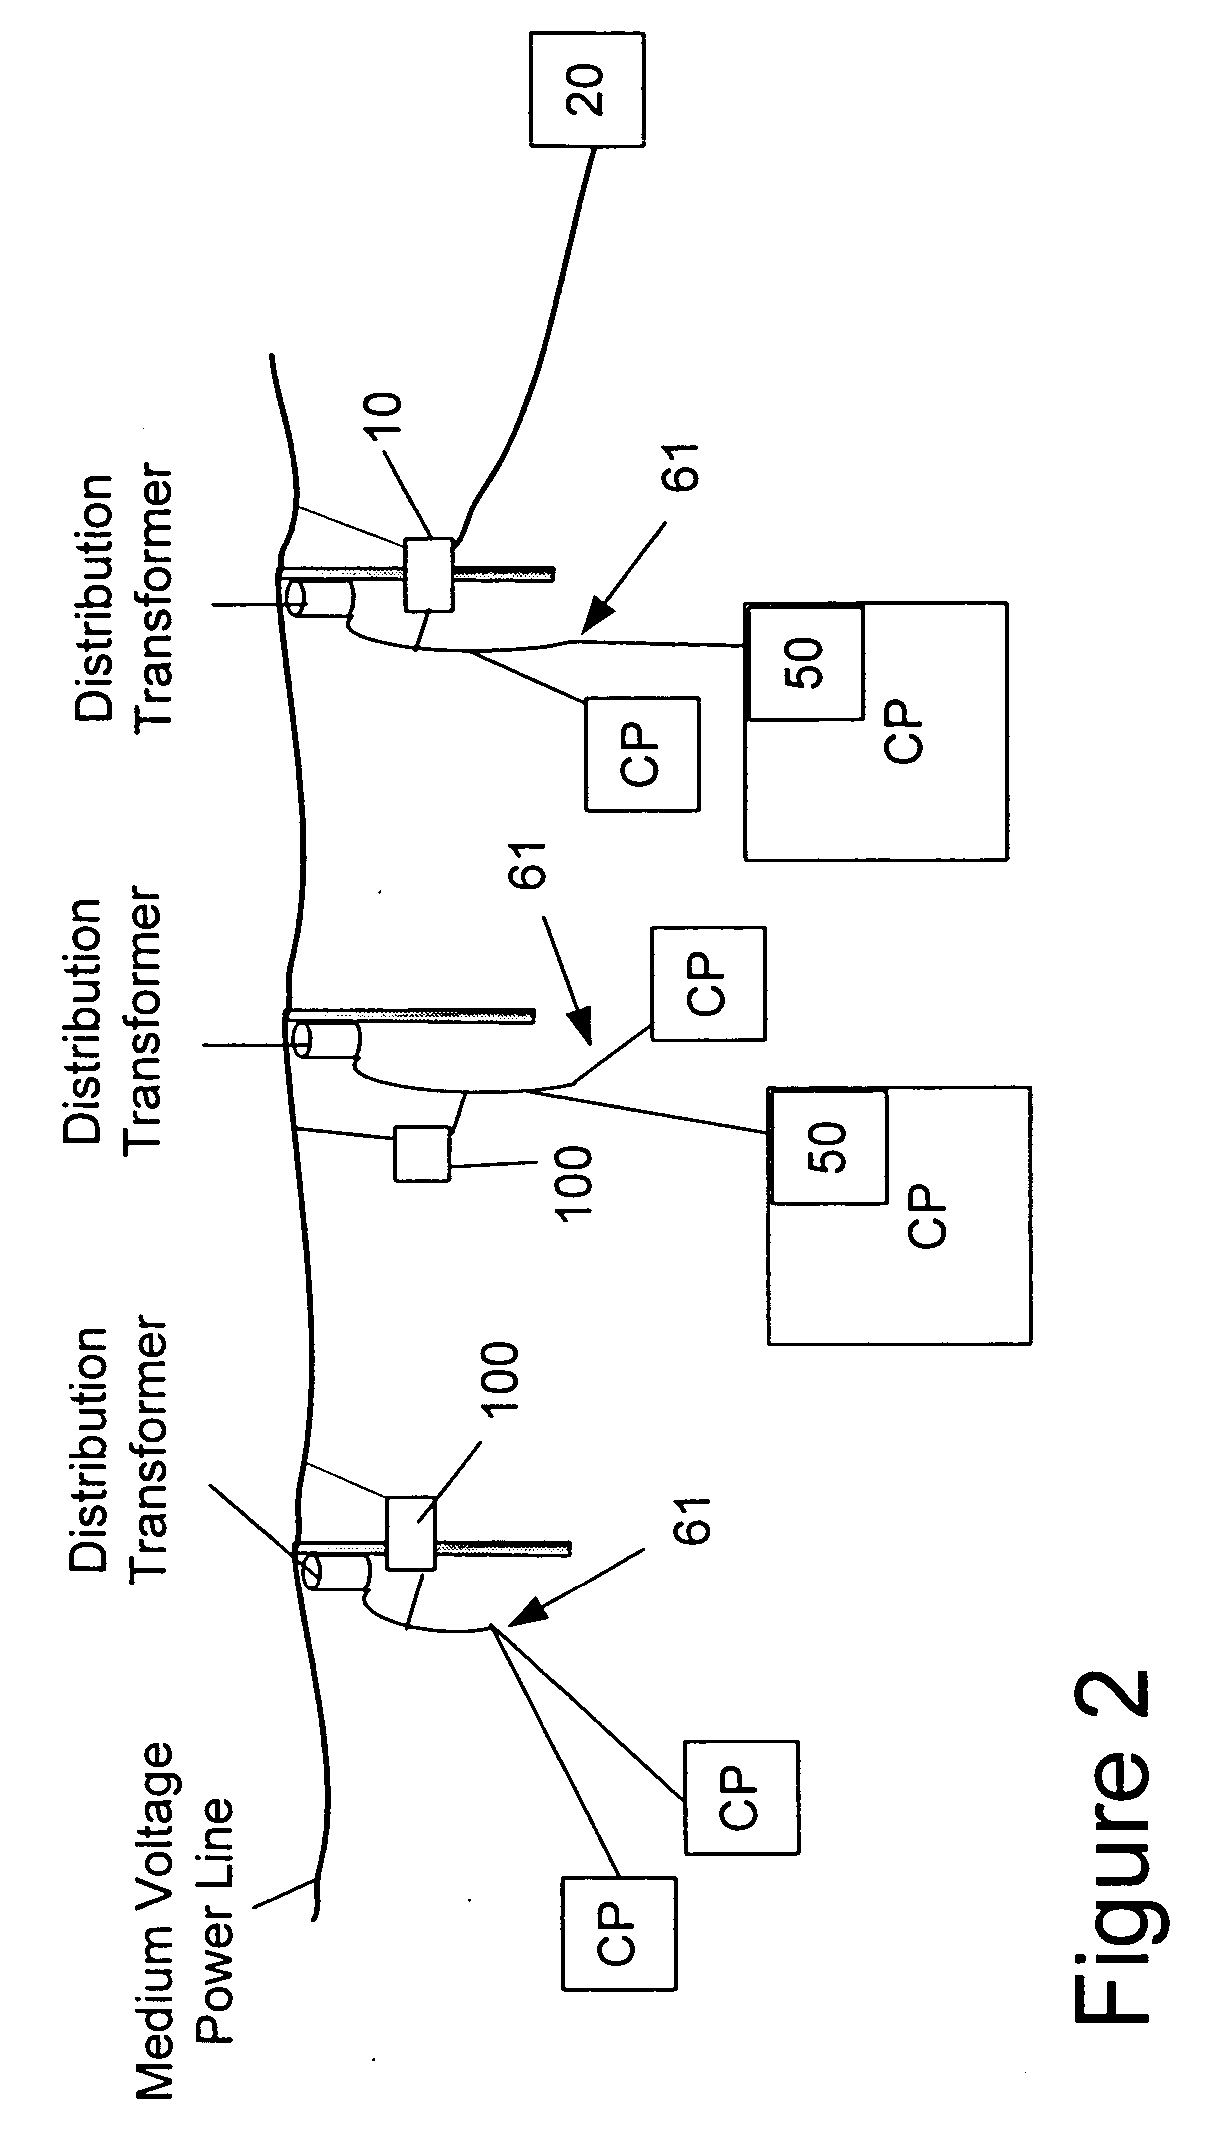 Power line communication rate limiting system and method